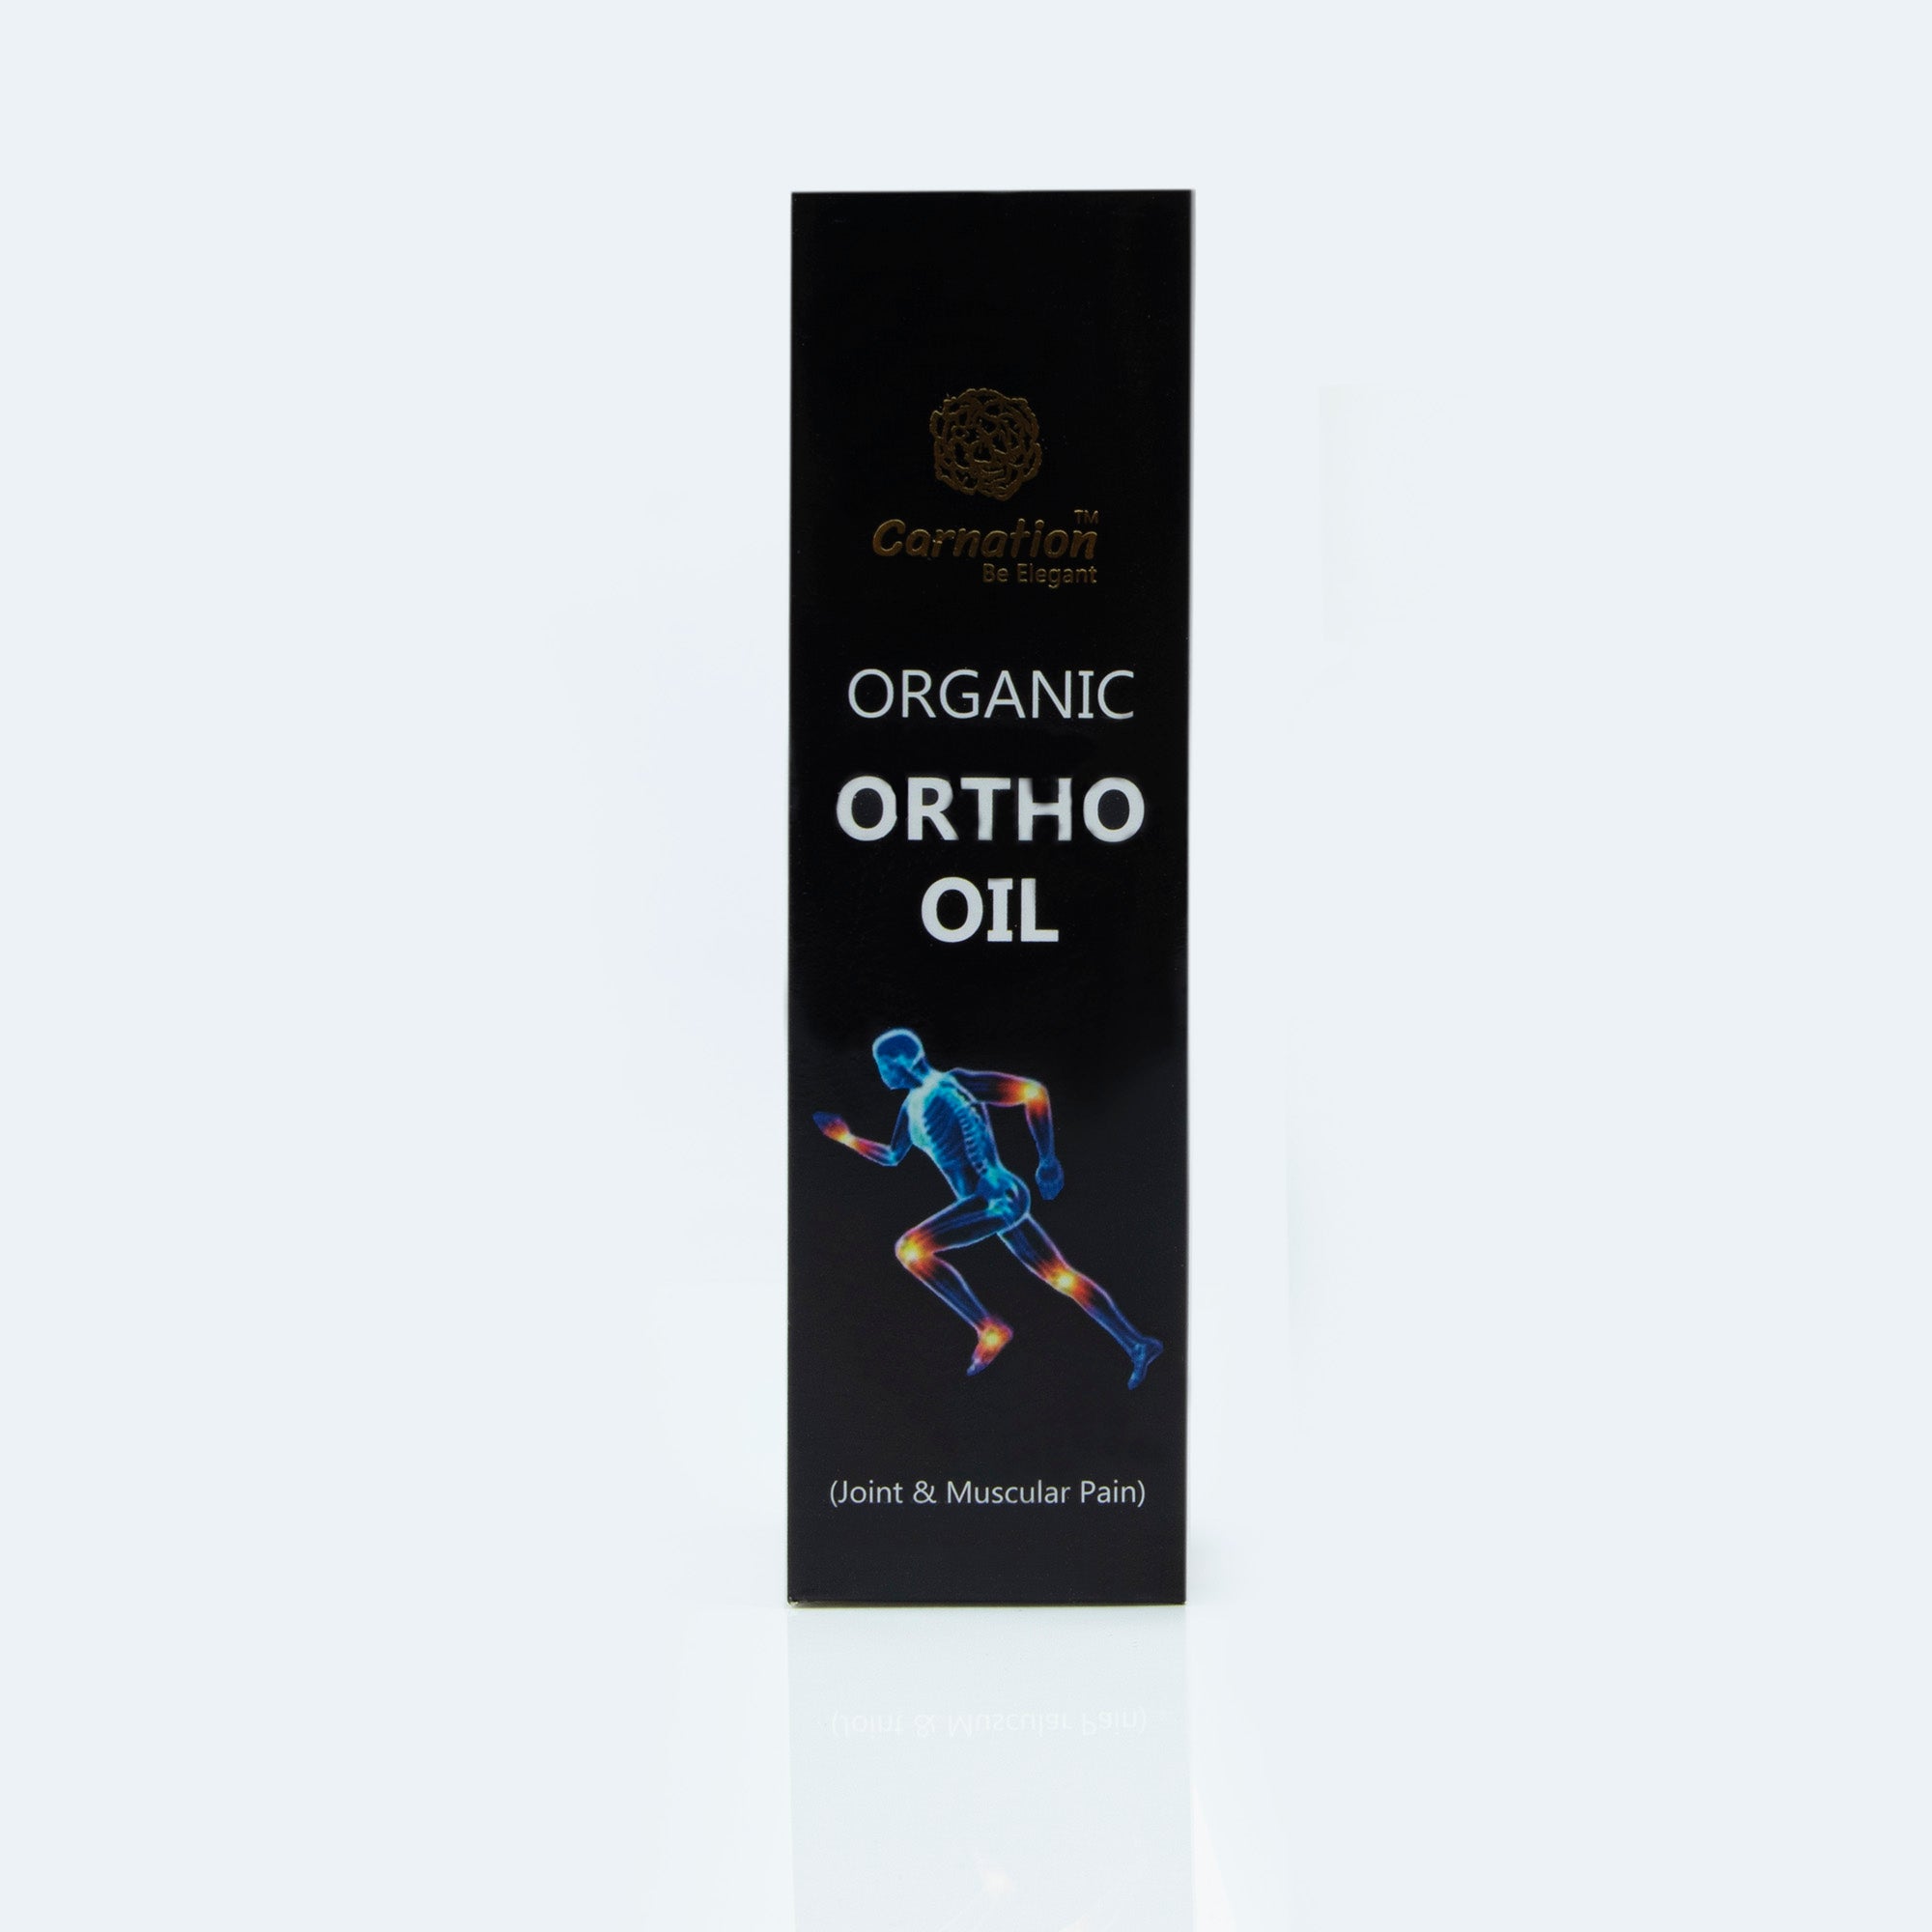 Ortho and muscles pain Oil